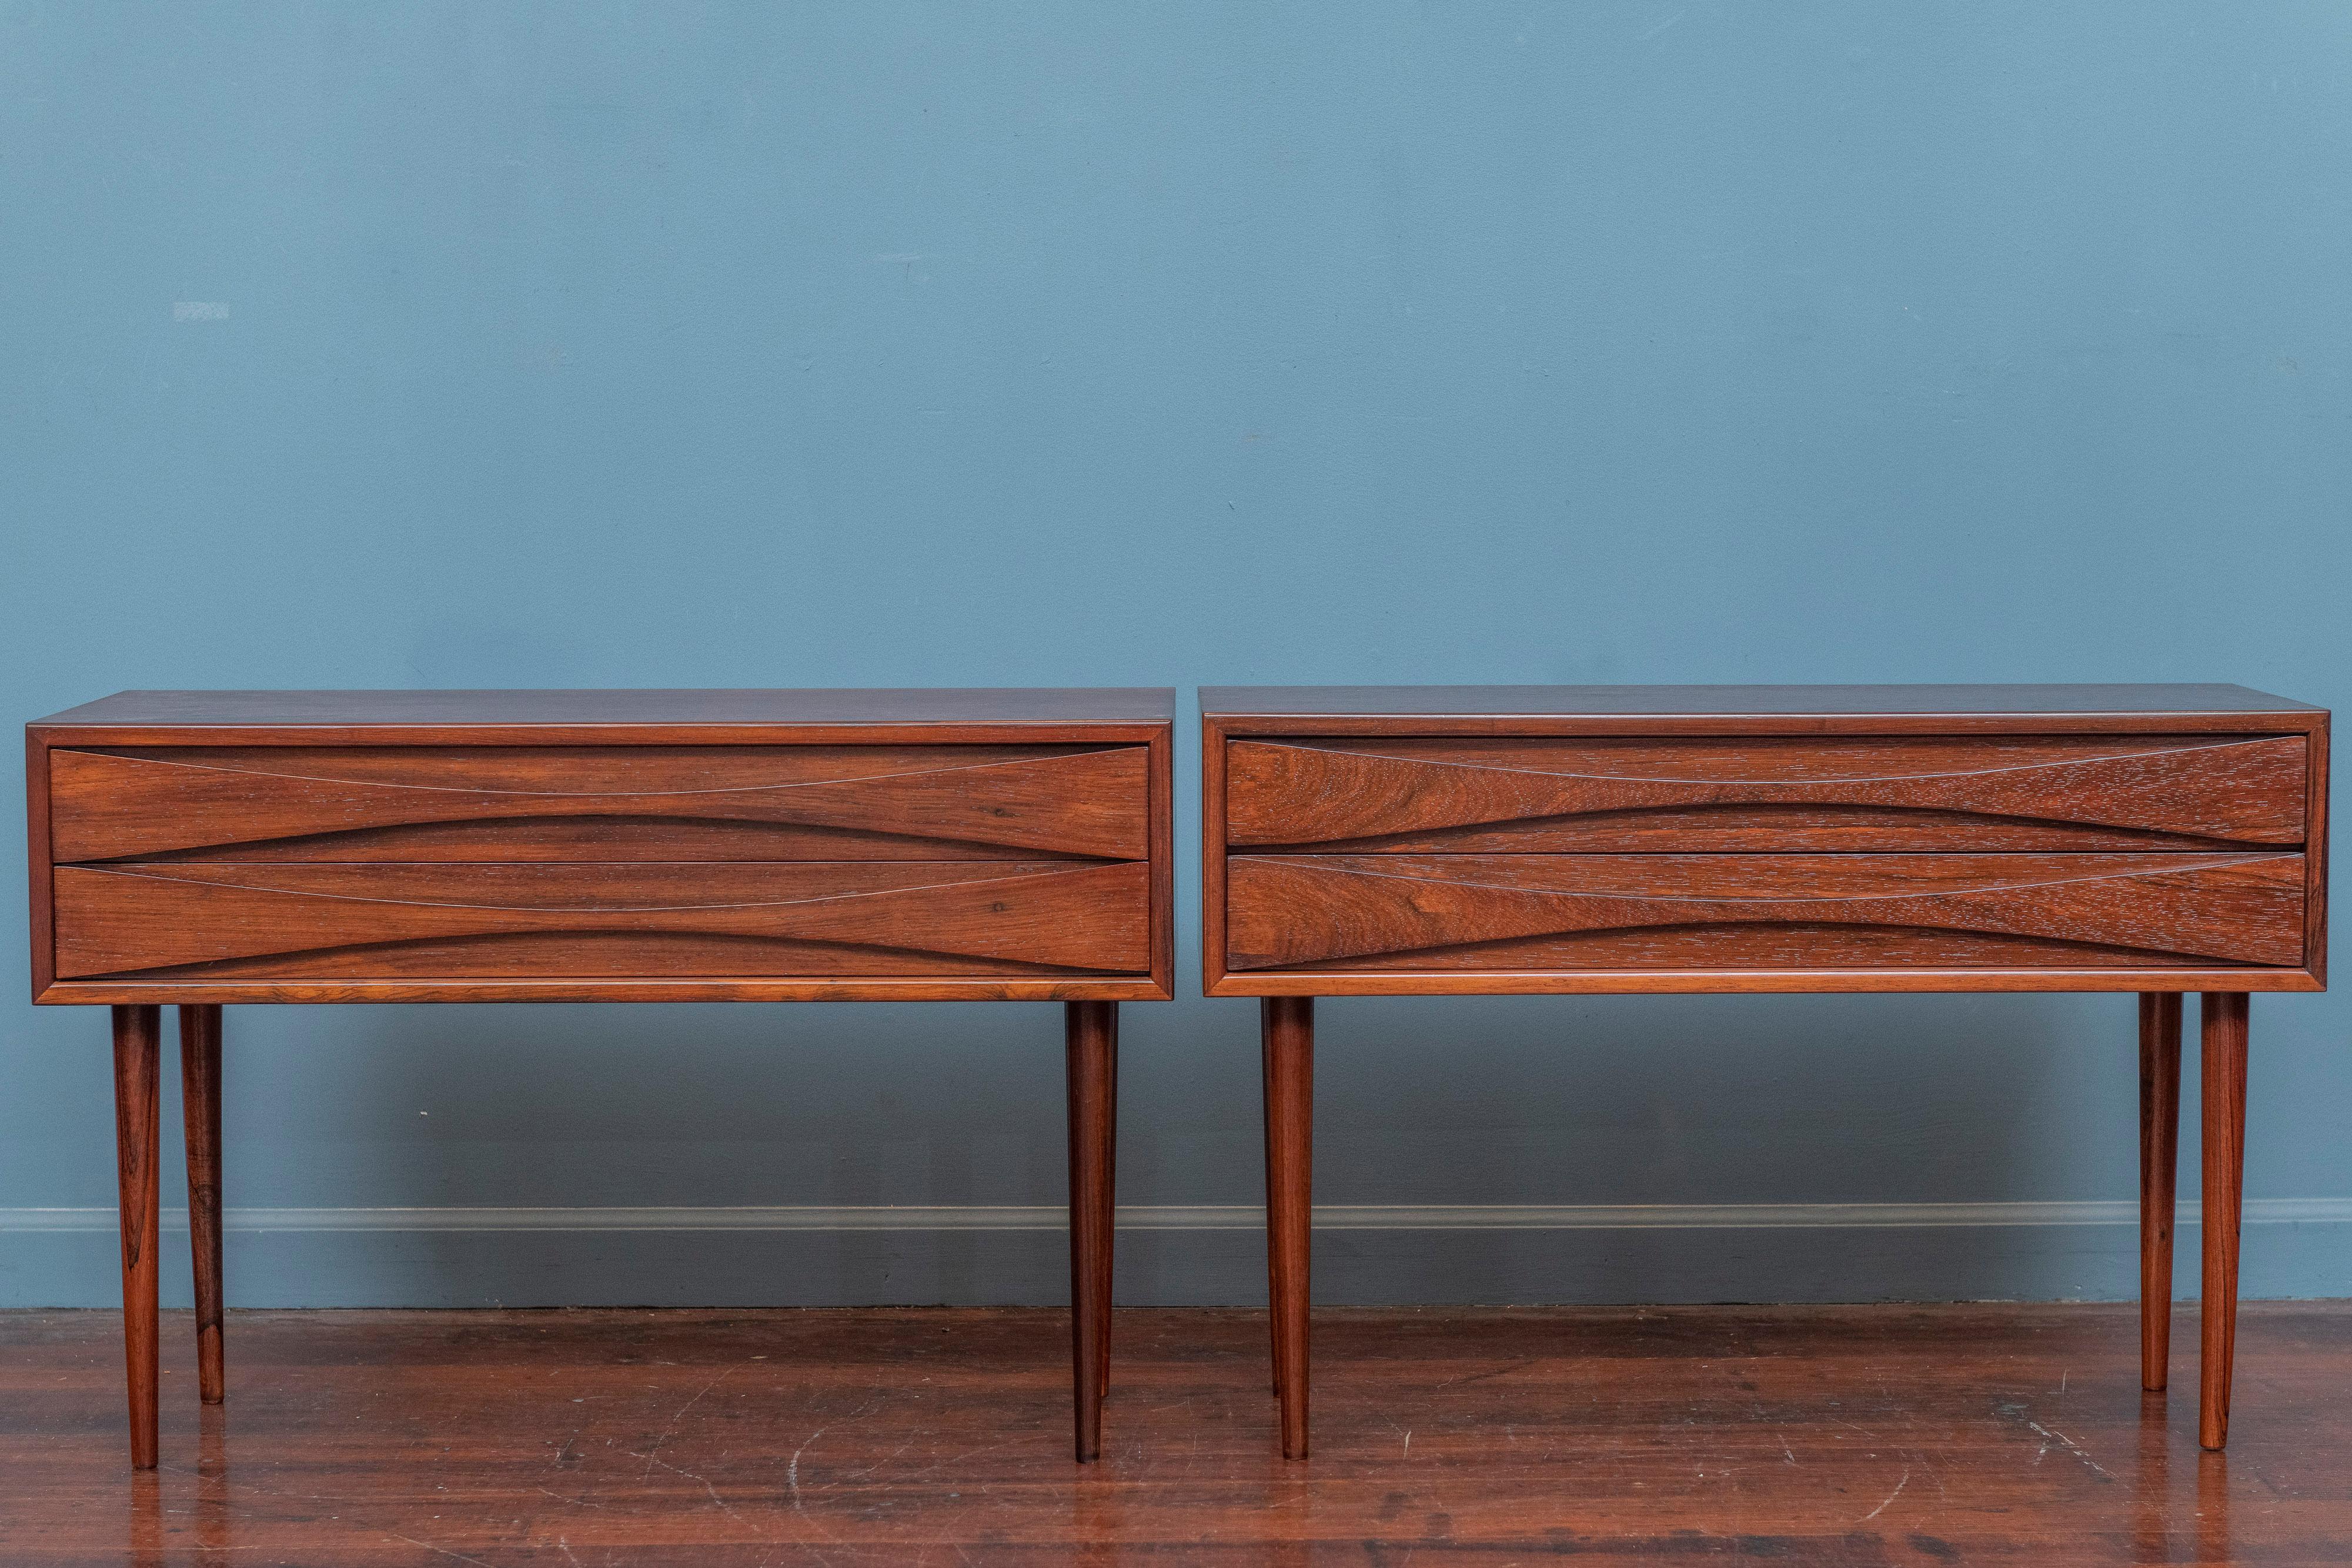 Niels Clausen design rosewood nightstands for N.C. Mobler, Denmark. Sophisticated design by a Danish design master executed in Brazilian rosewood with his signature drawer pull design. Rare pair of nightstands that have just been newly refinished